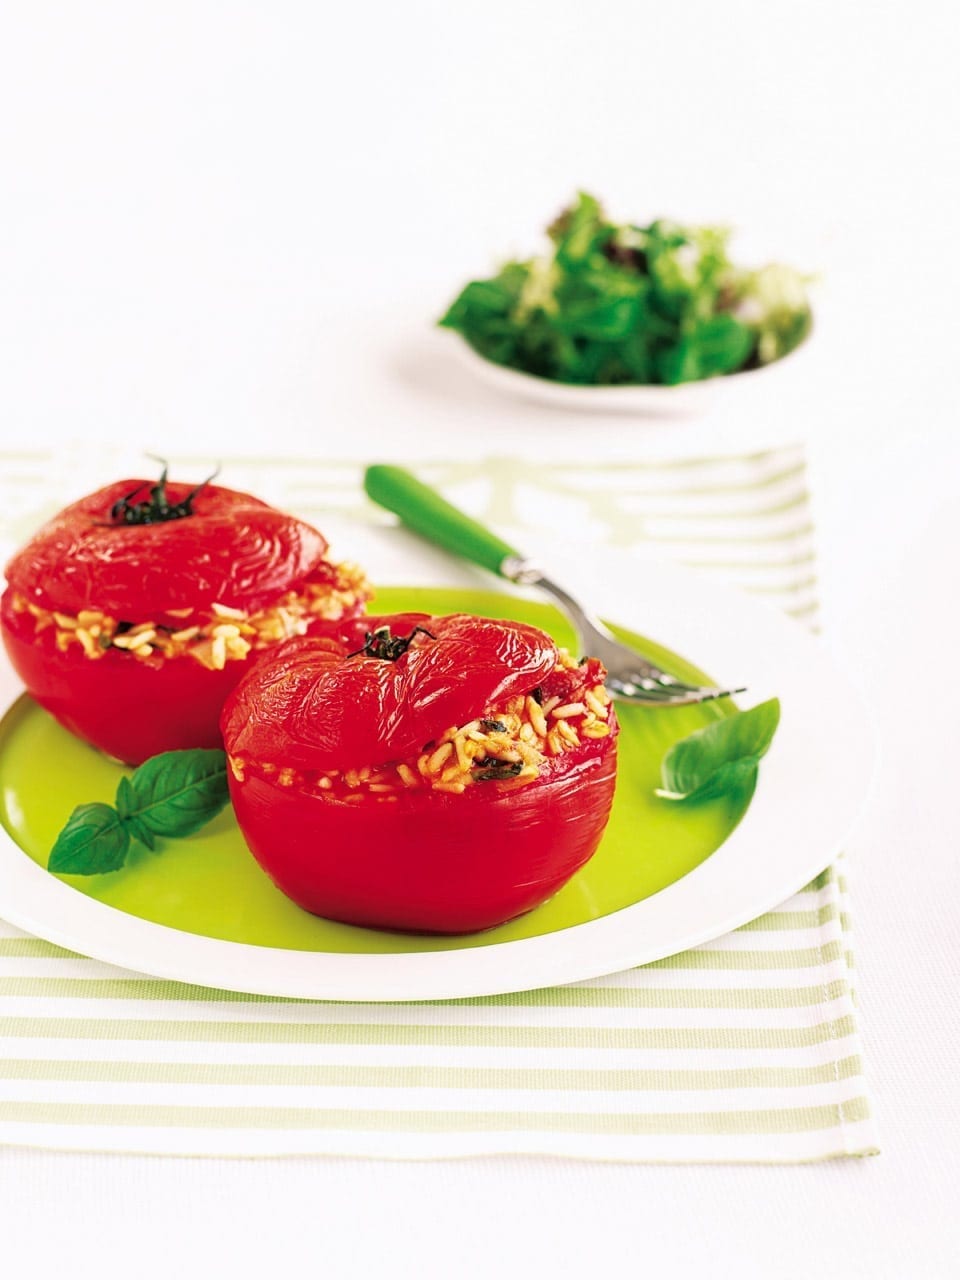 Baked stuffed tomatoes filled with lemon, basil and Parmesan rice ...